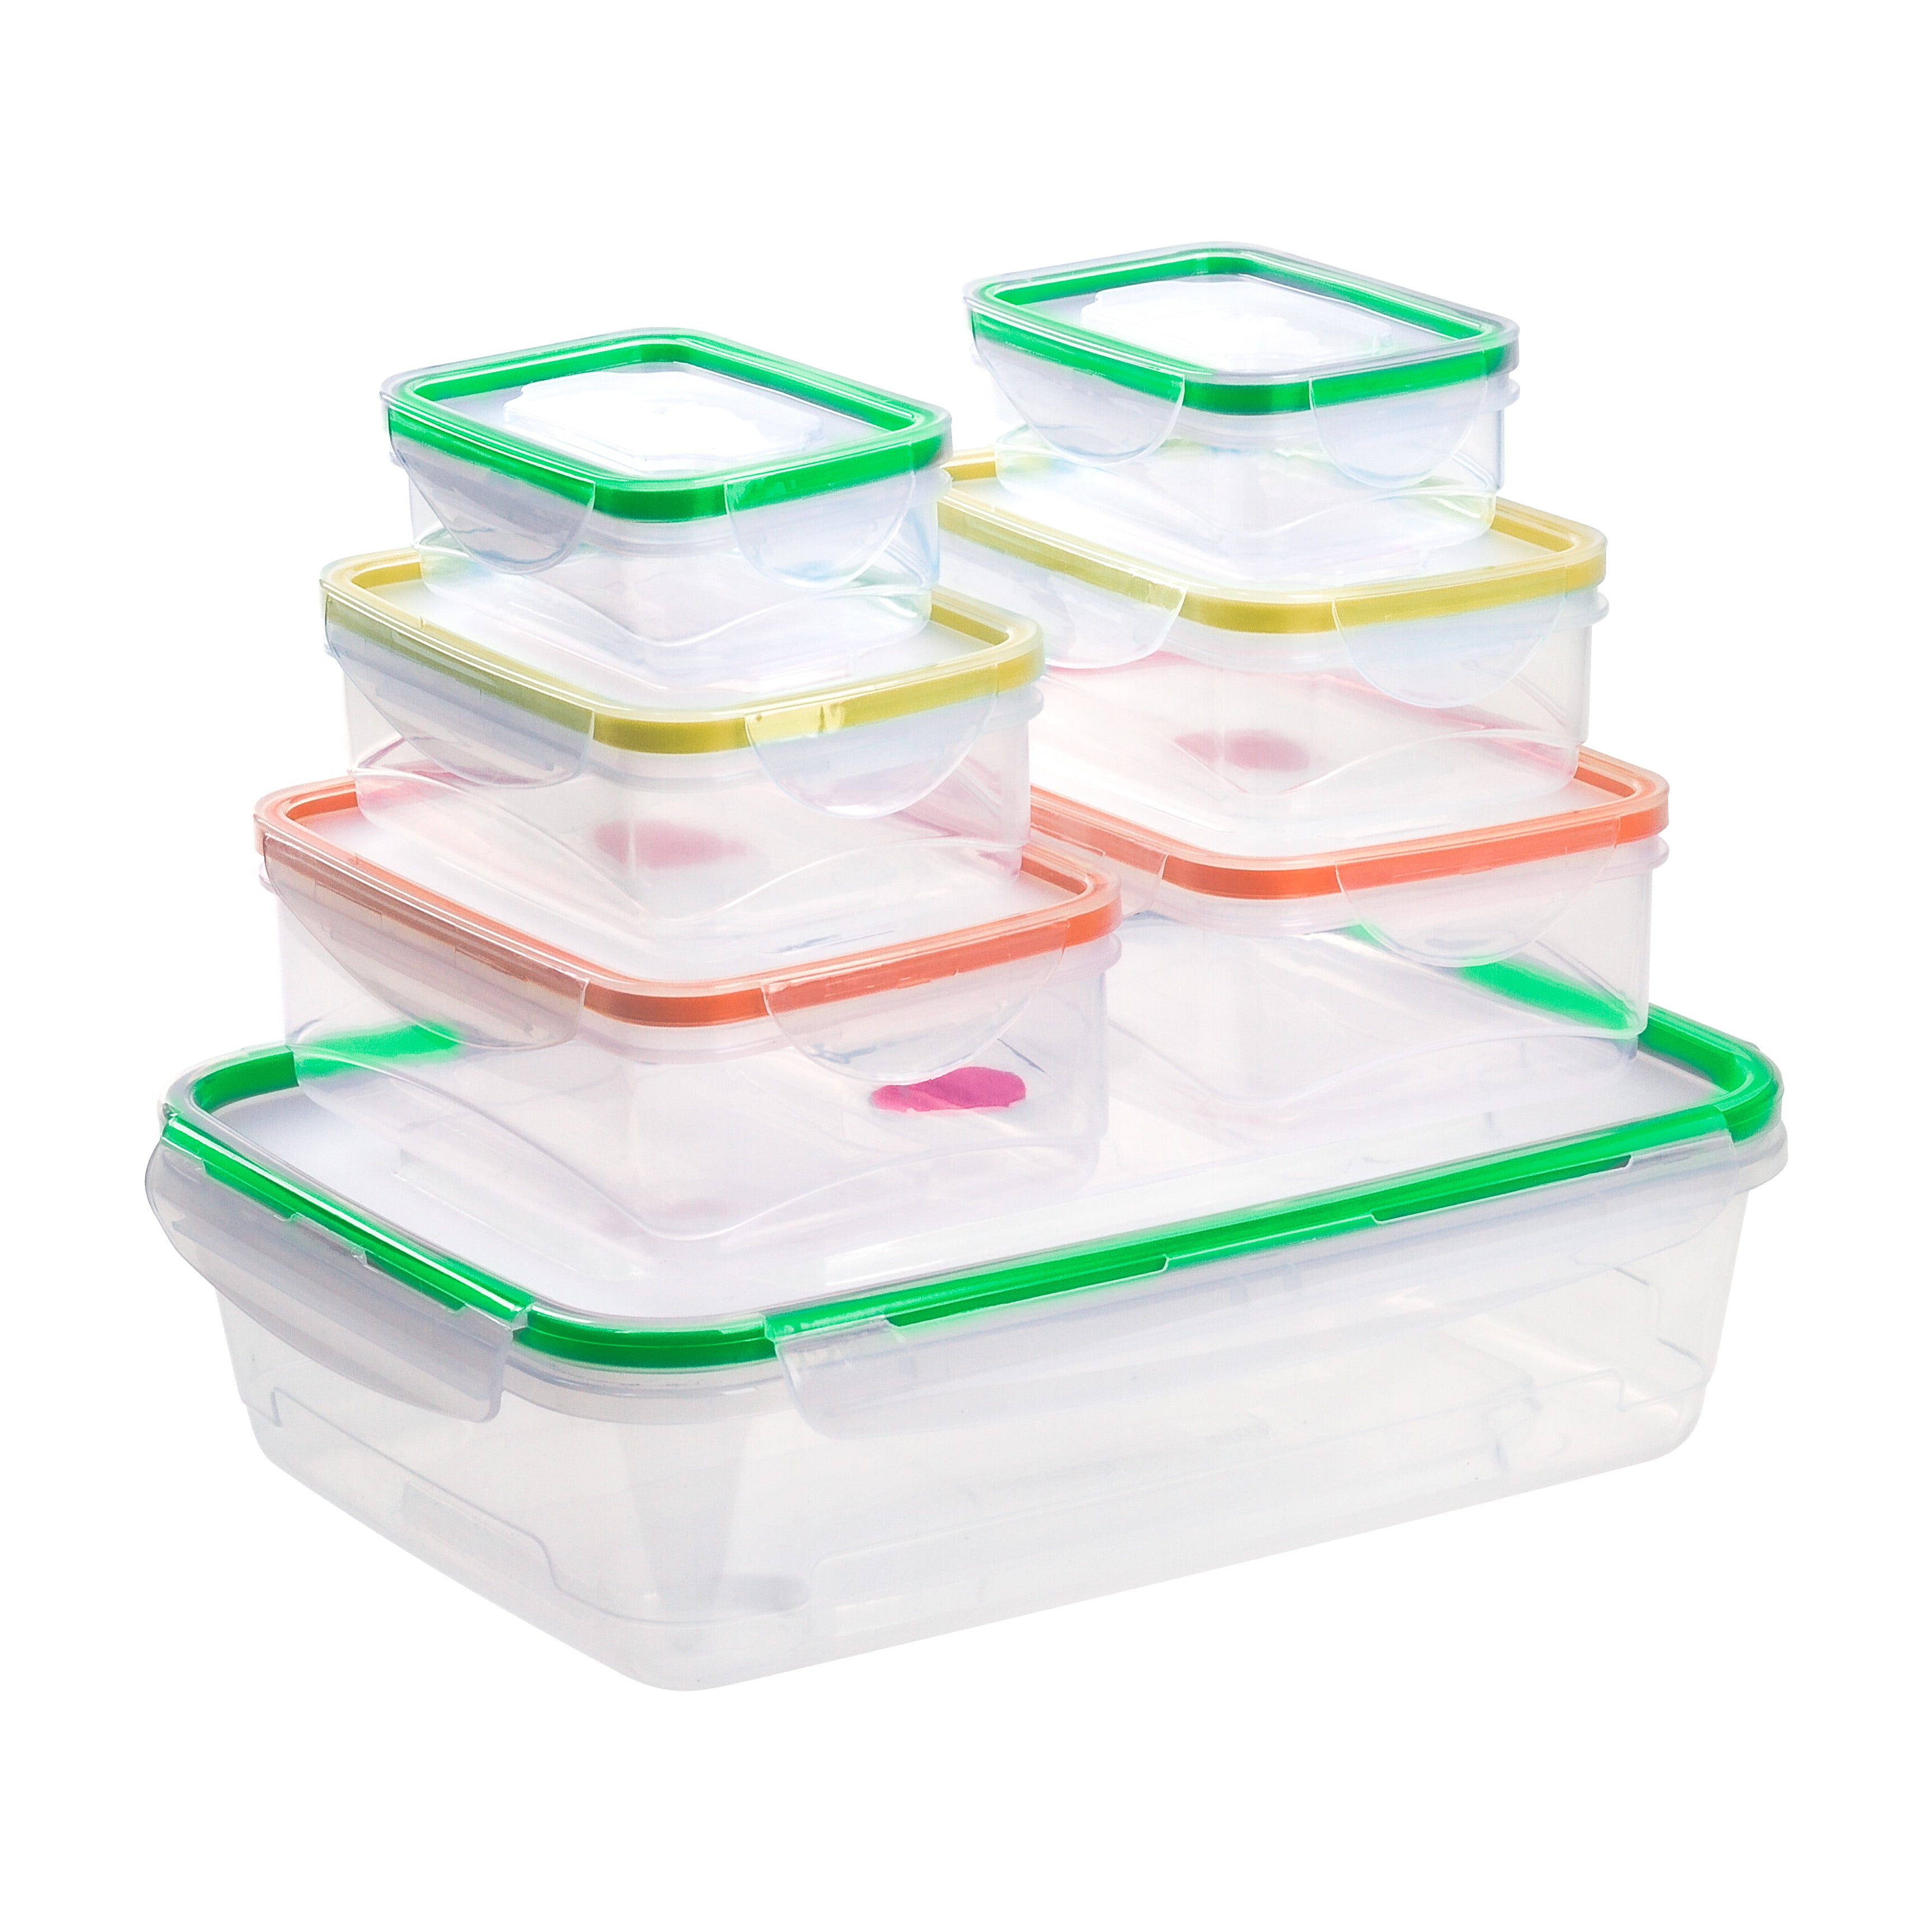 Plas Glas 42 Piece Stackable Plastic Food Storage Lunch Containers and Lids Set 